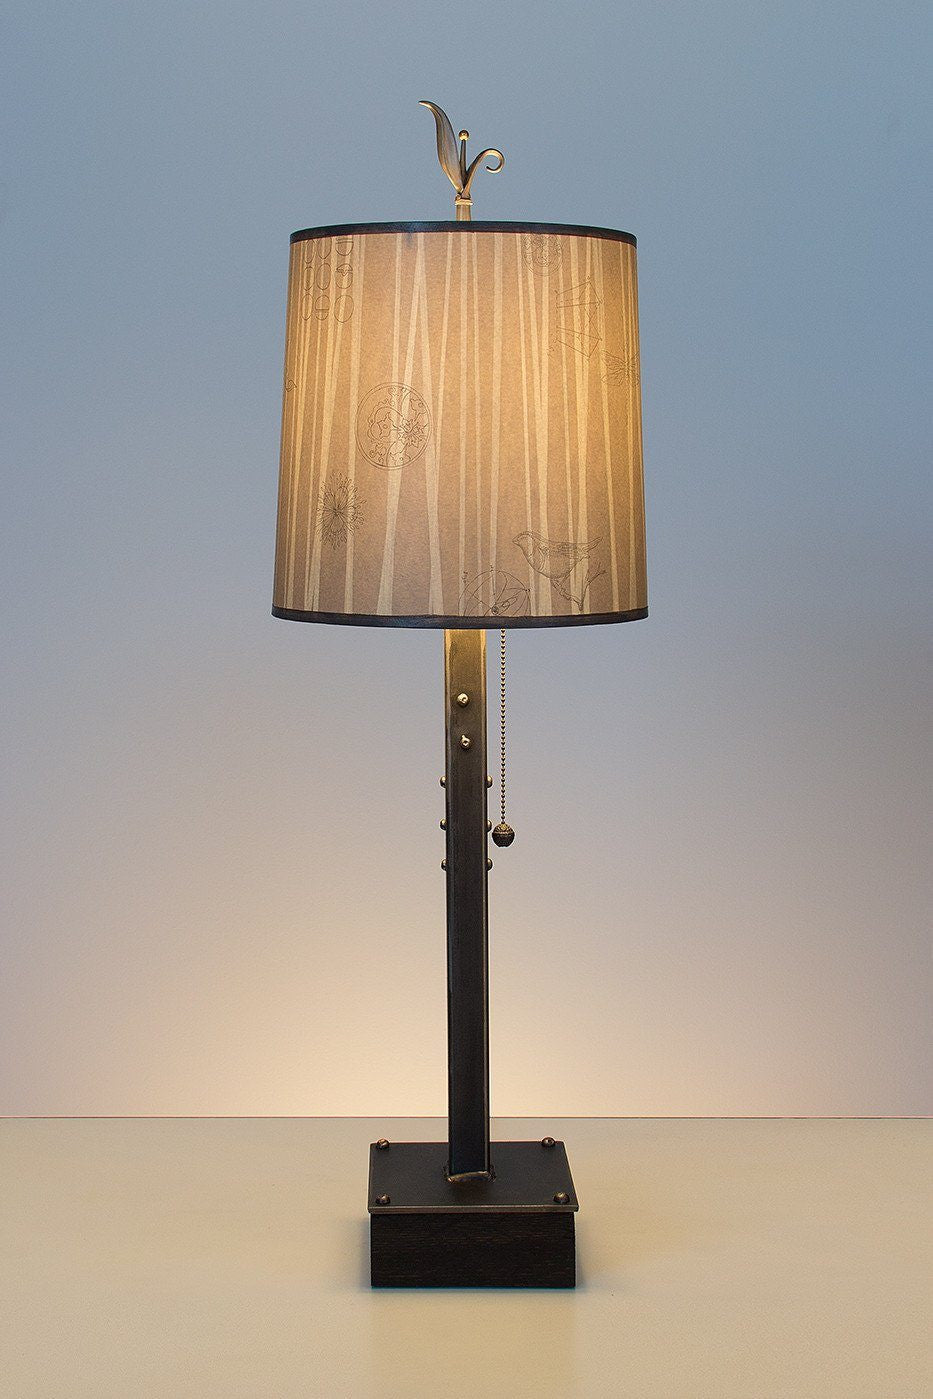 Janna Ugone &amp; Co Table Lamps Steel Table Lamp on Wood with Medium Drum Shade in Birch Lines